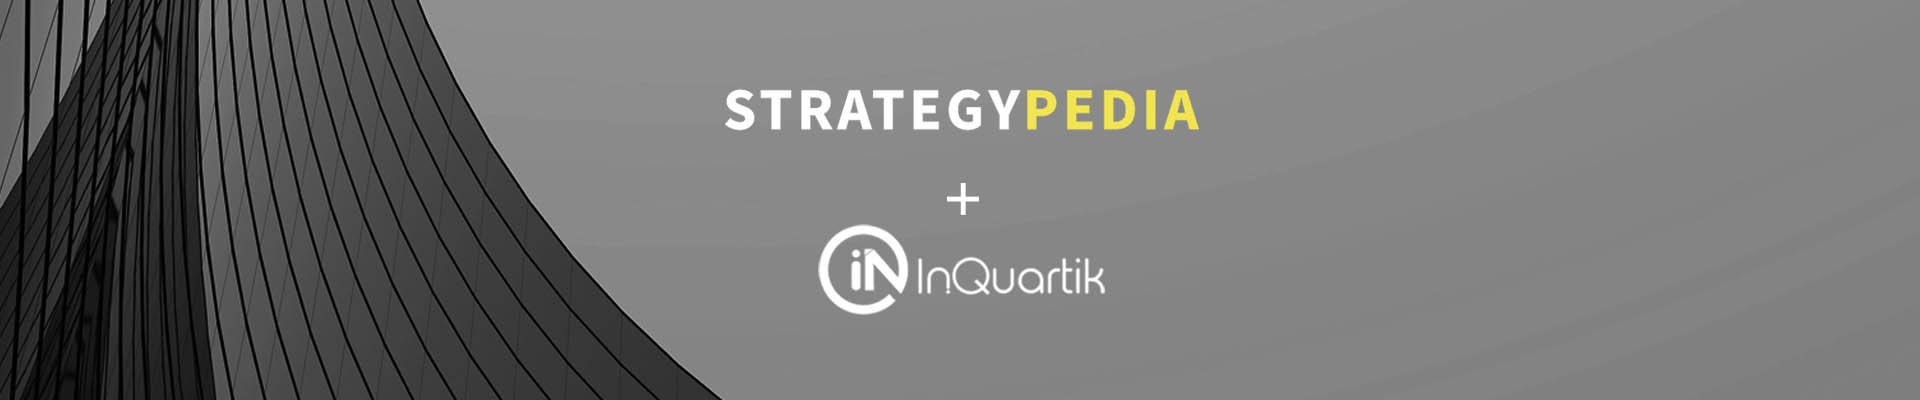 Strategypedia Partners With InQuartik To Strengthen IP Innovation in Southeast Asia